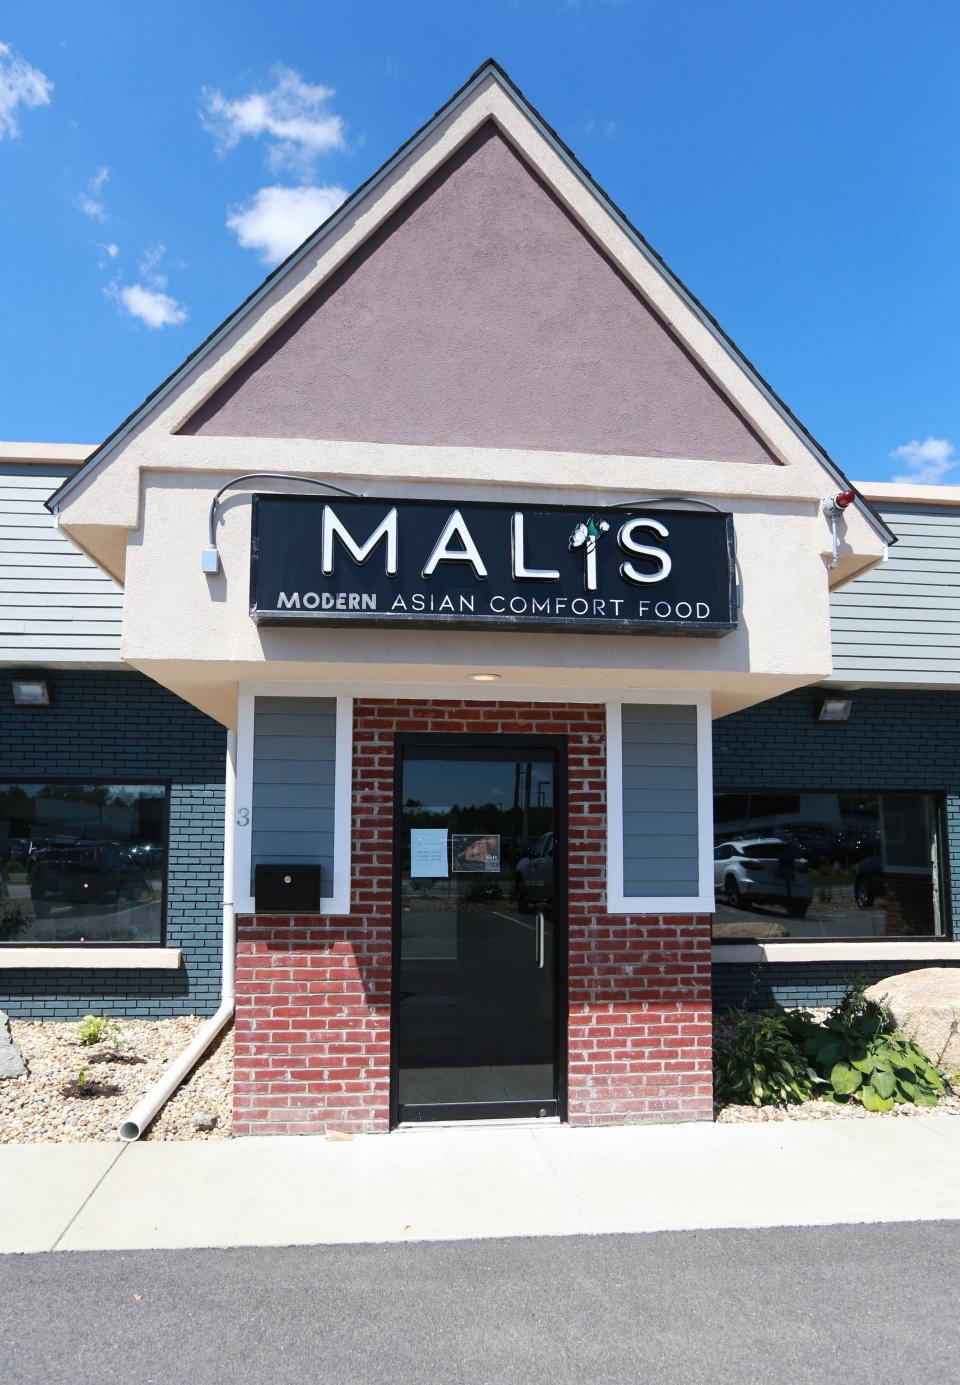 The front entrance of Malis in Raynham, pictured in 2022.